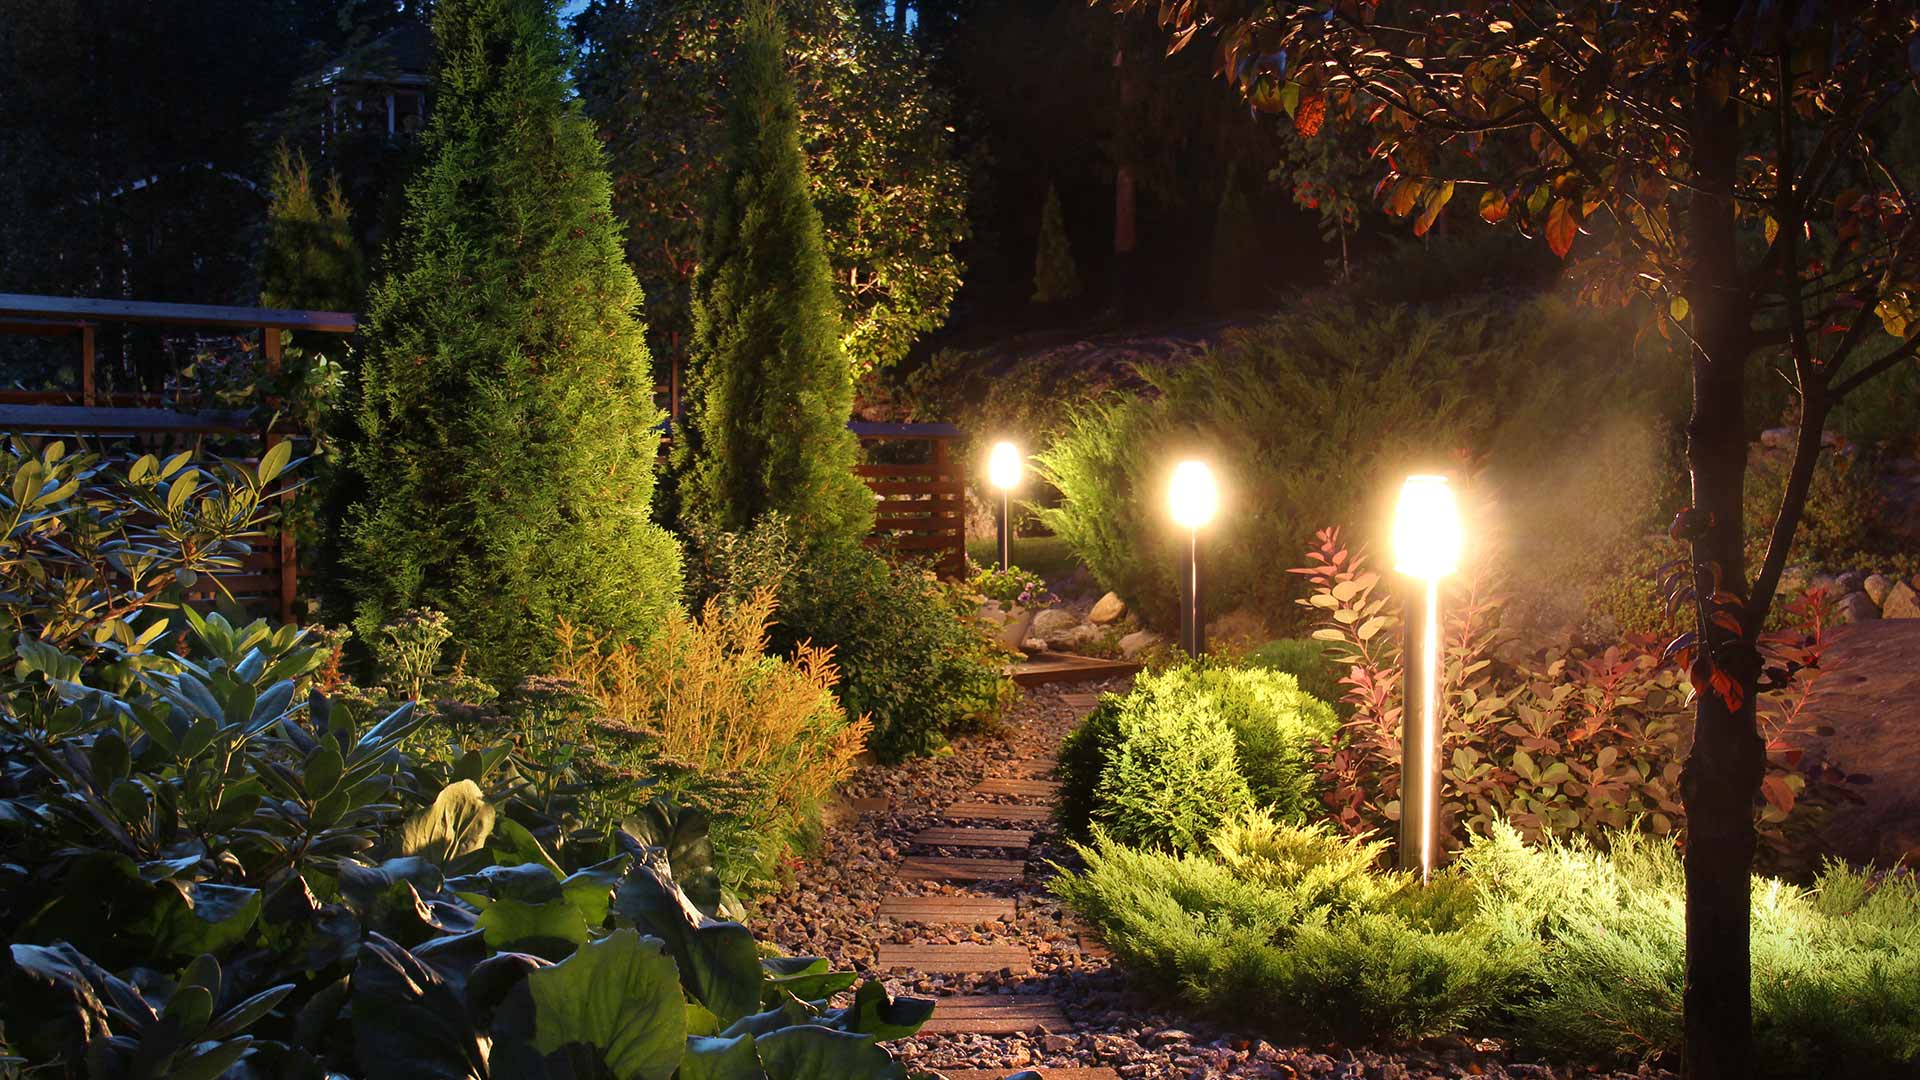 Make Sure You’re Using LED Bulbs for Your Outdoor Lighting System